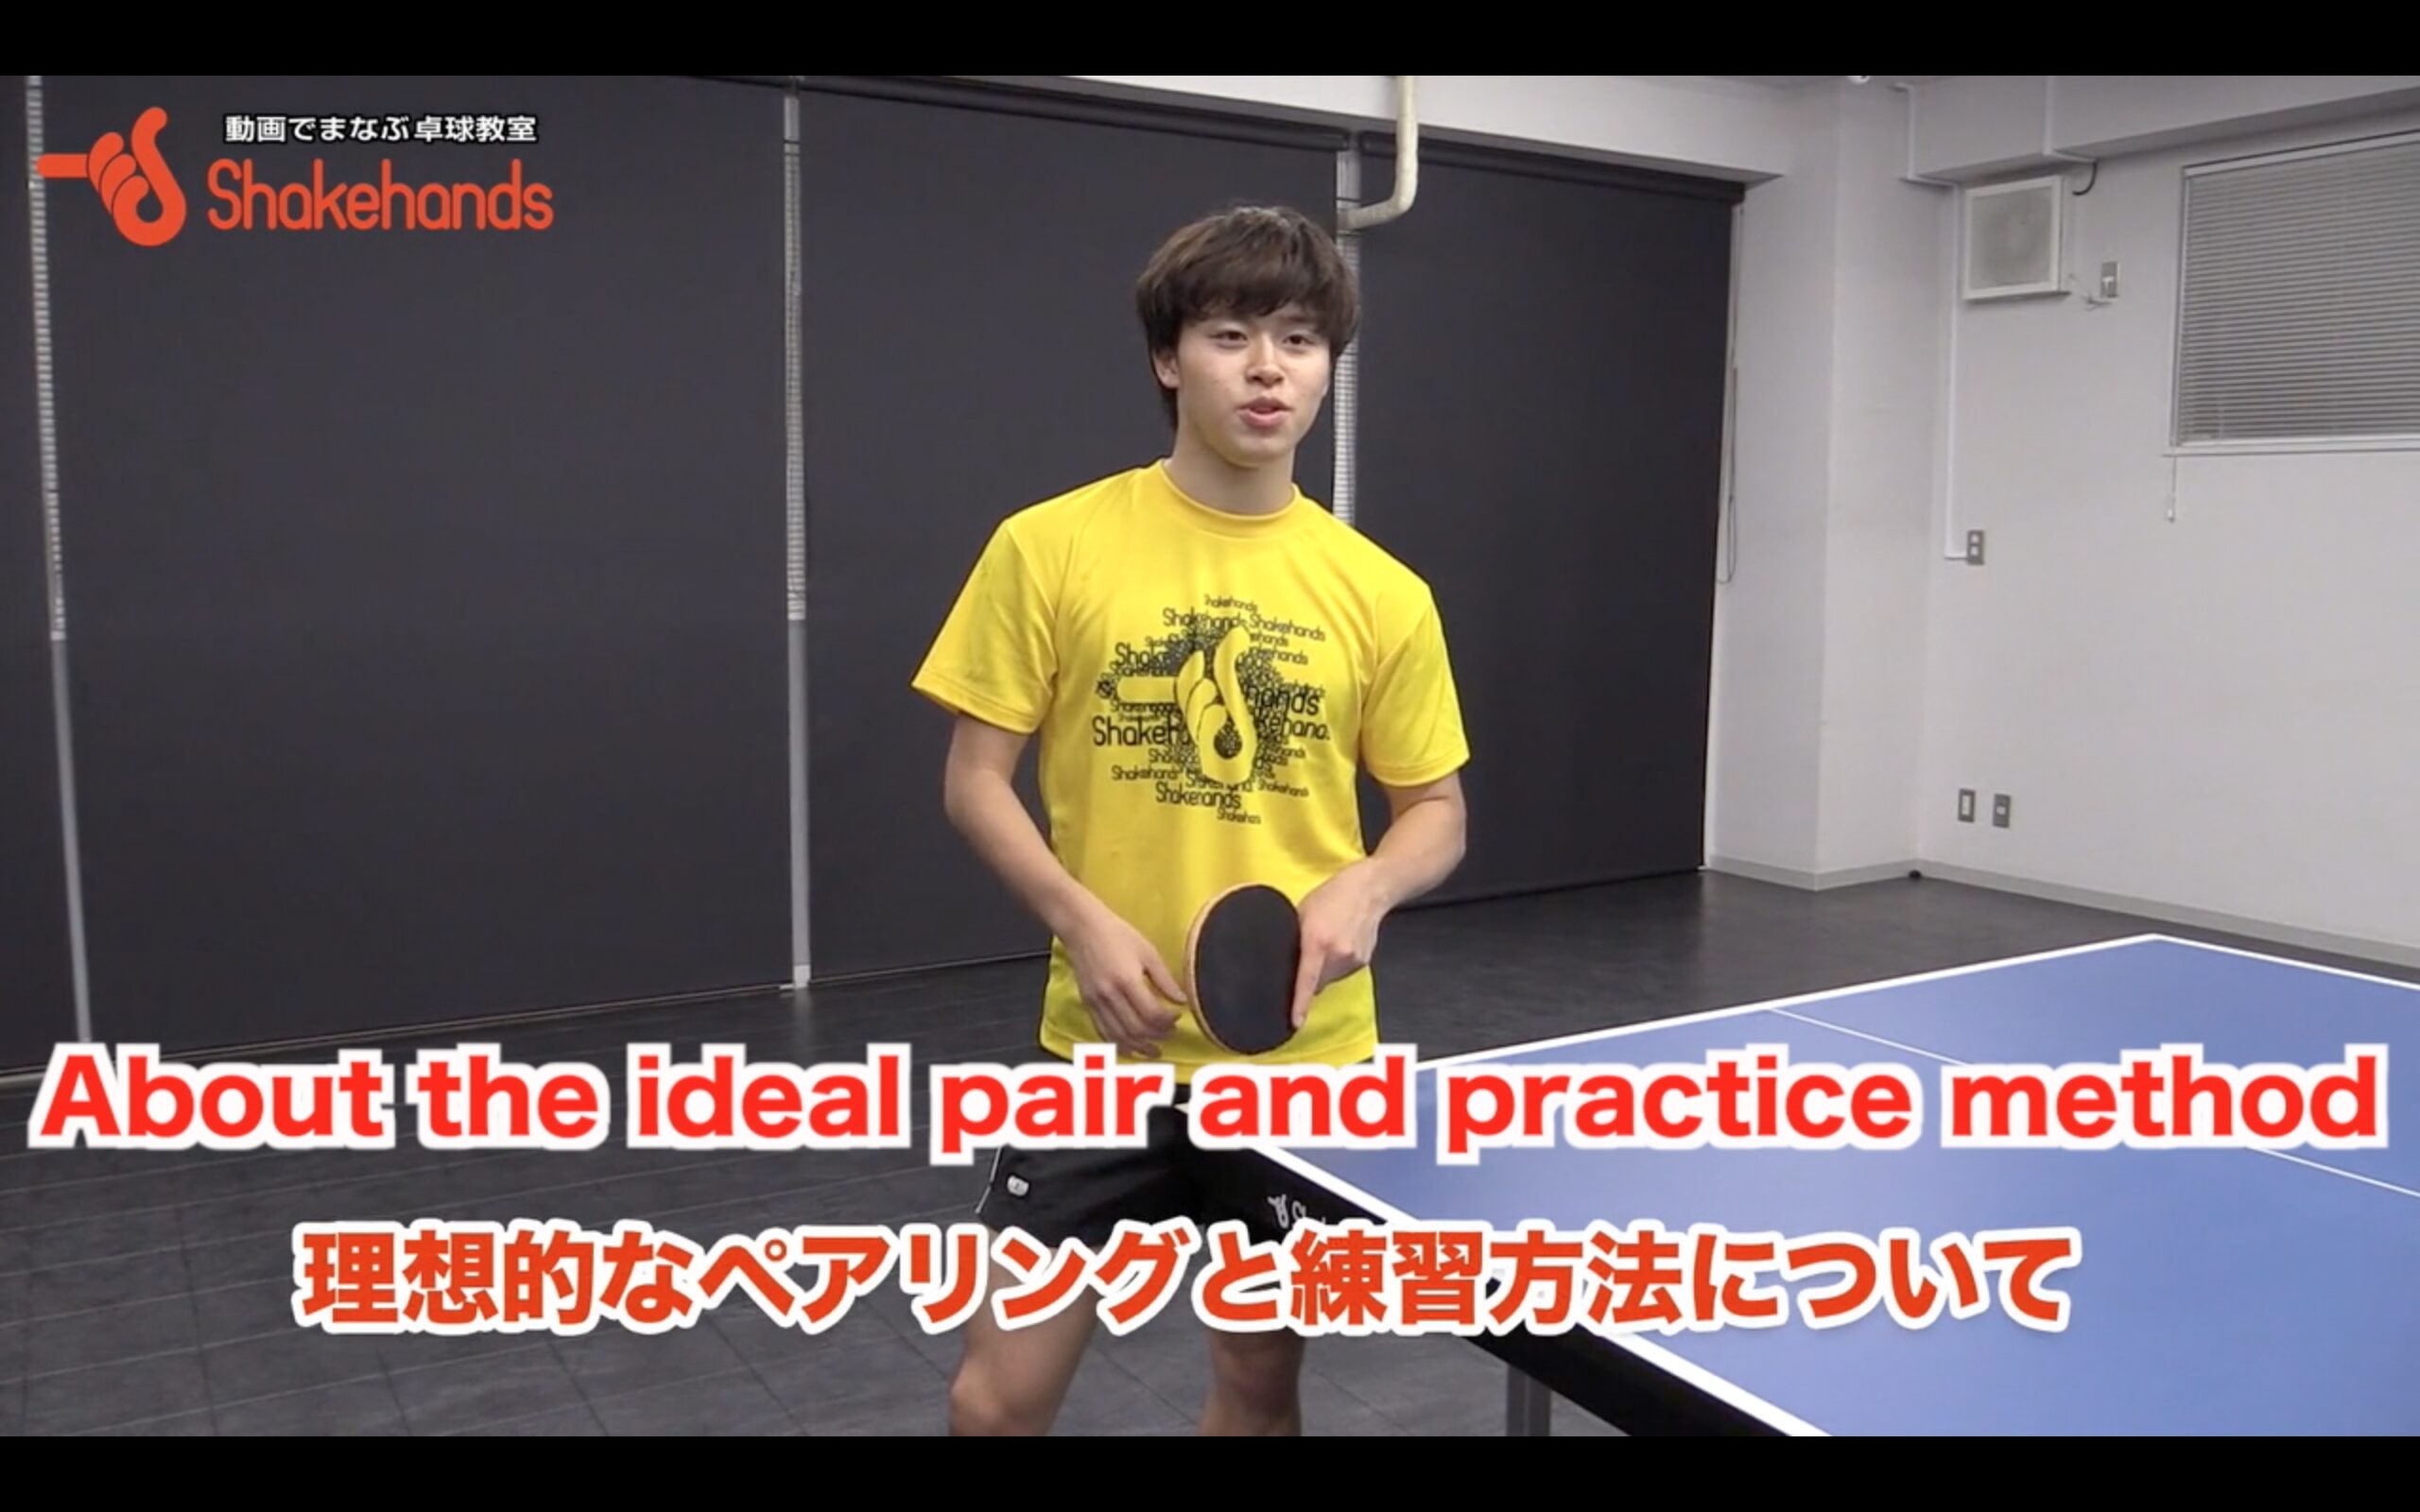 About the ideal pair and practice method